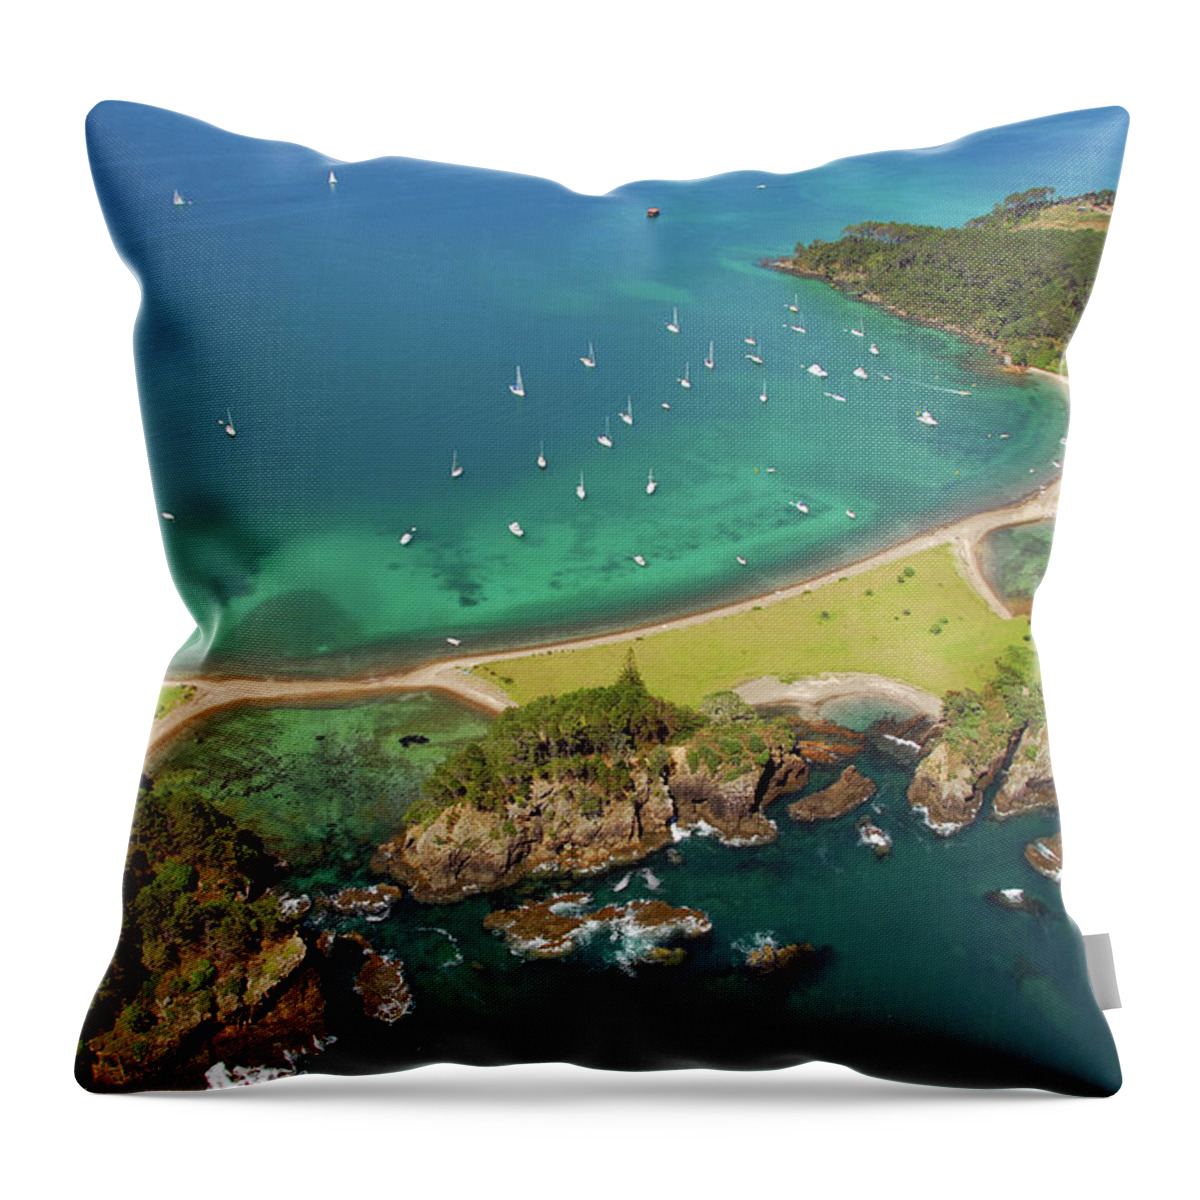 Tranquility Throw Pillow featuring the photograph Roberton Island by Ruth Lawton Photography